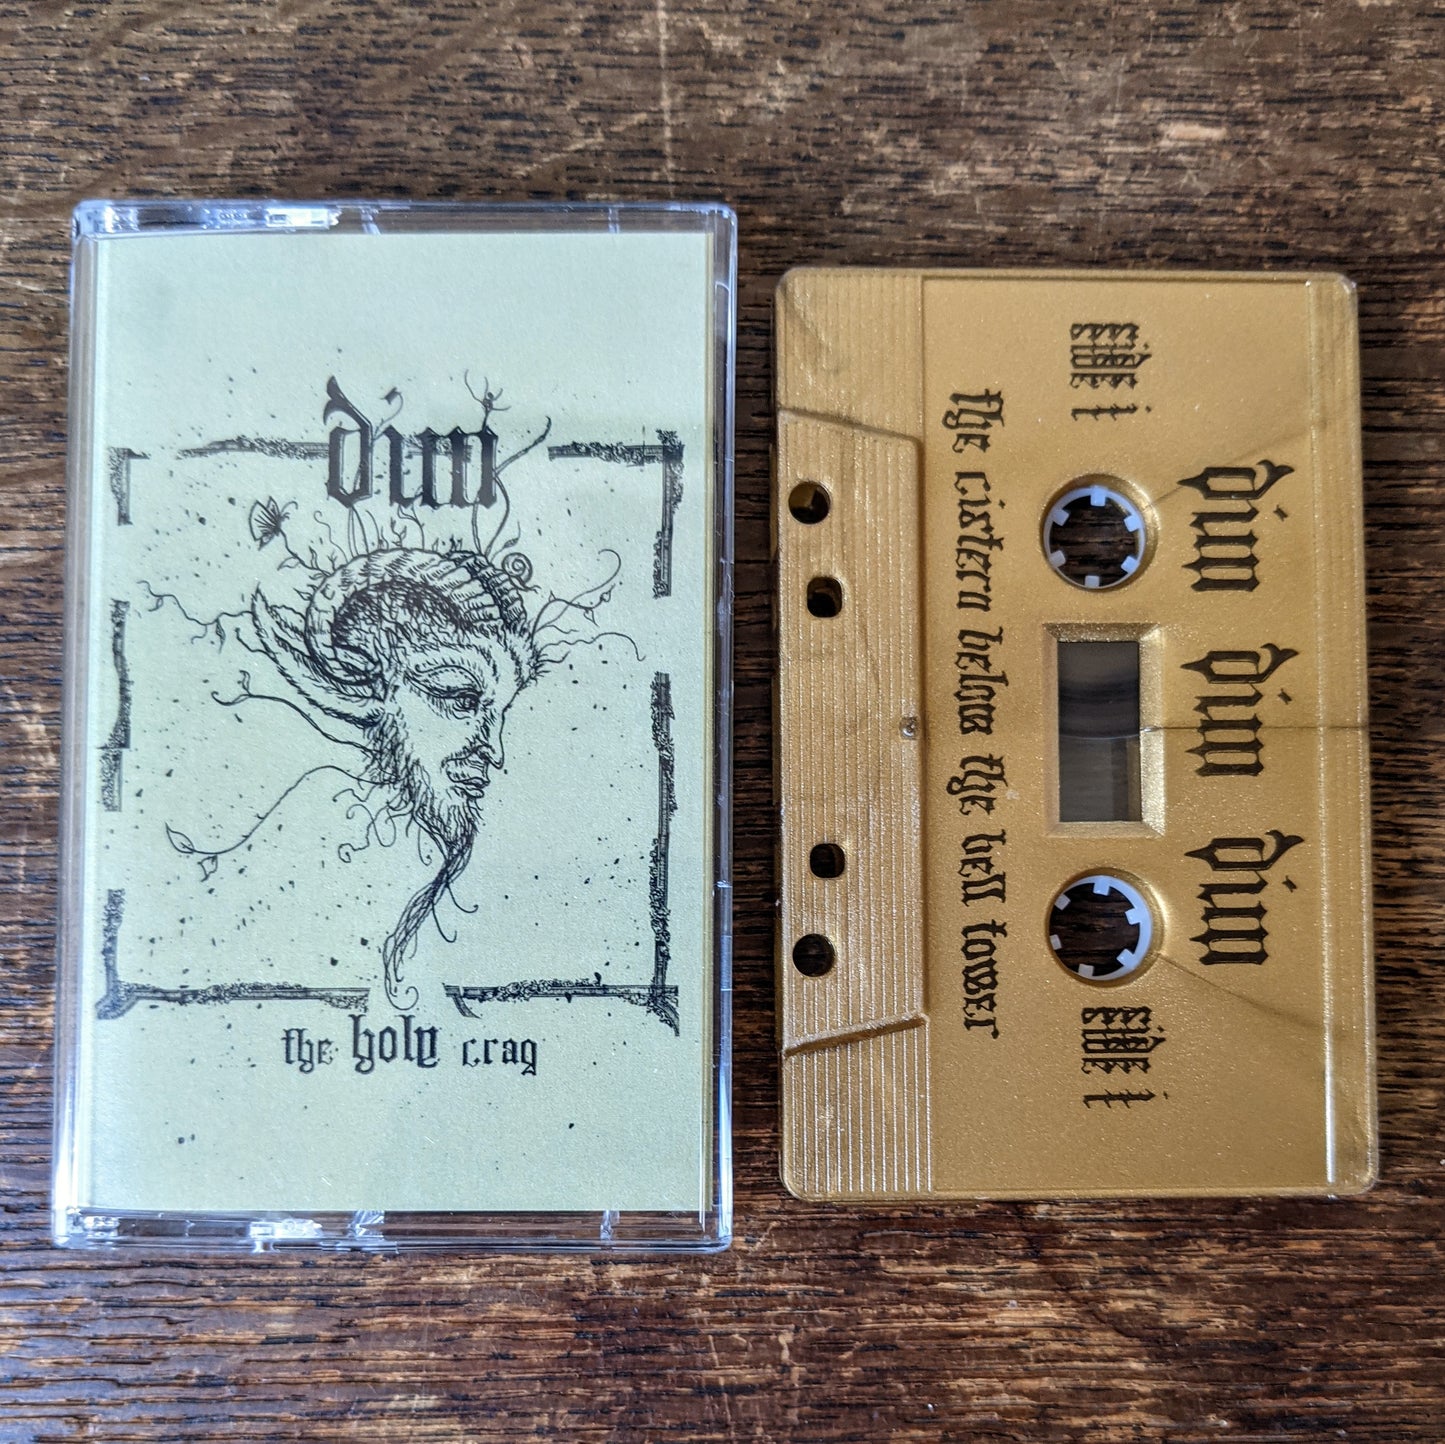 [SOLD OUT] DIM "The Holy Crag" Cassette Tape